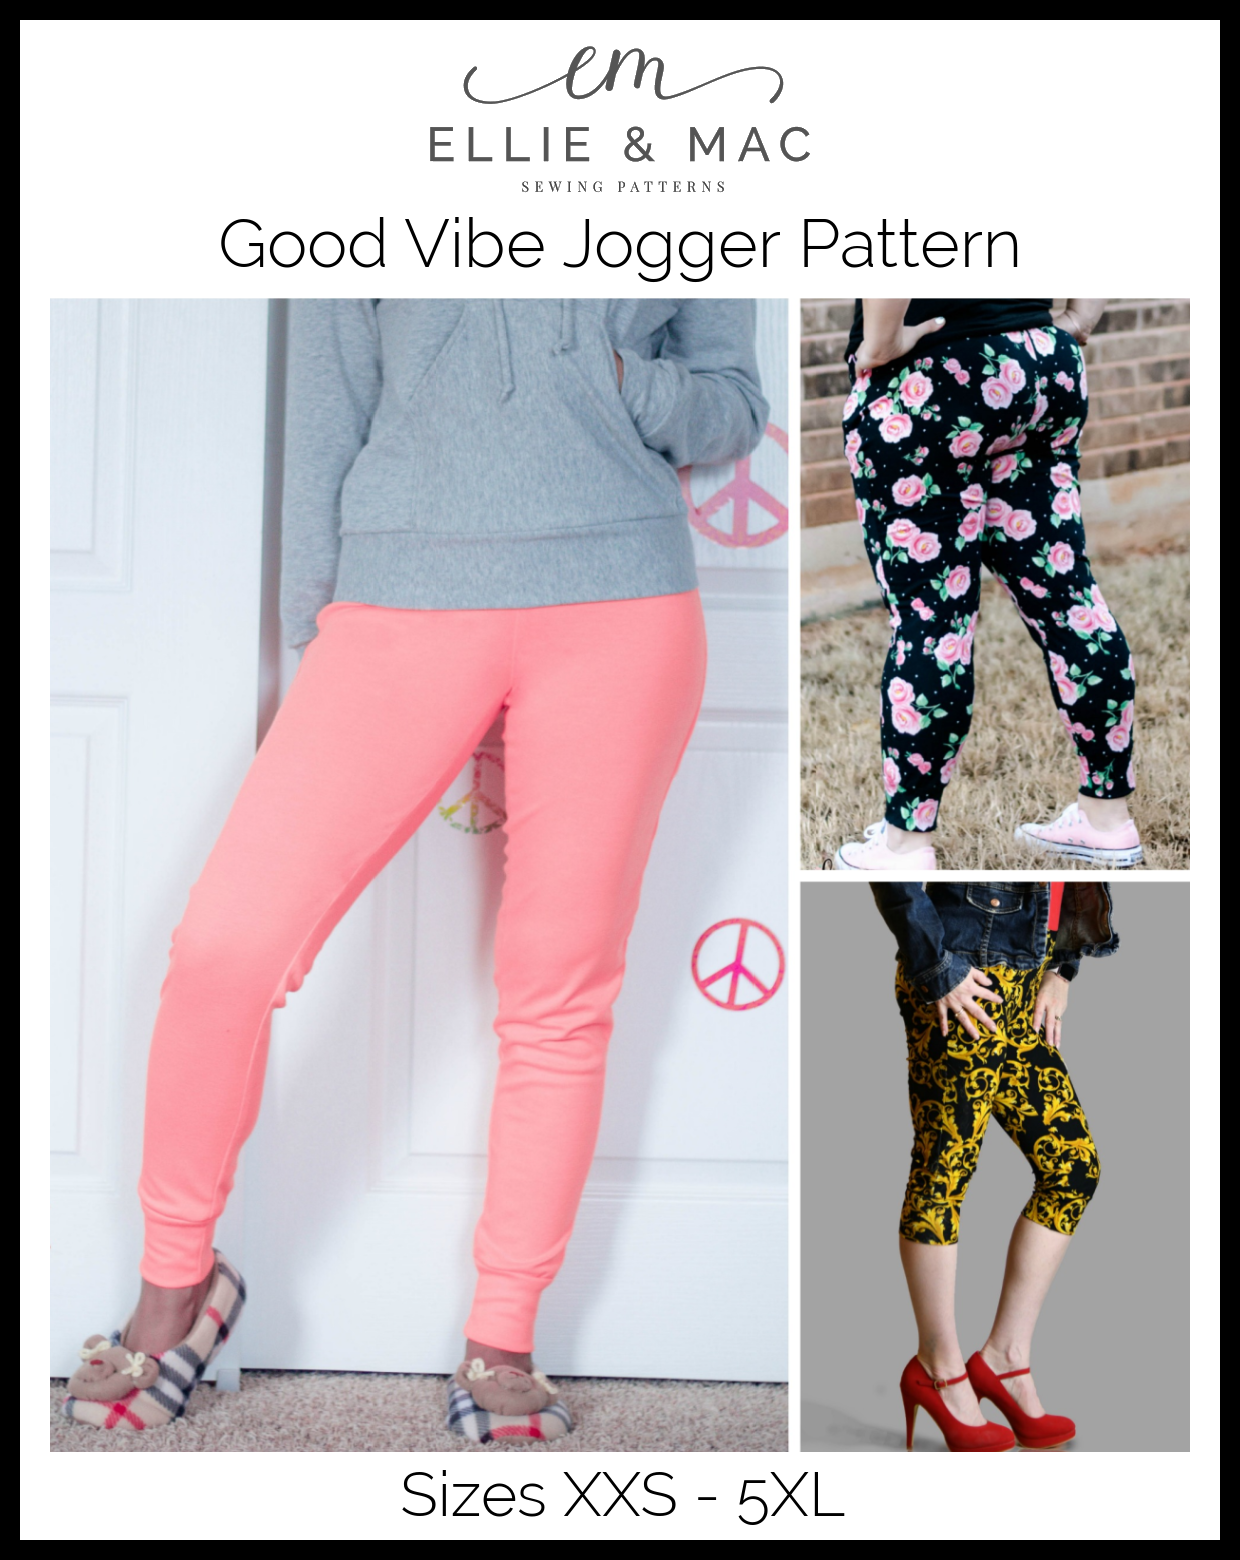 My Favorite Easy Ways To Wear Jogger Pants For Women 20+ Ideas 2020  Jogger  pants outfit women, Jogger pants outfit dressy, Jogger pants outfit casual